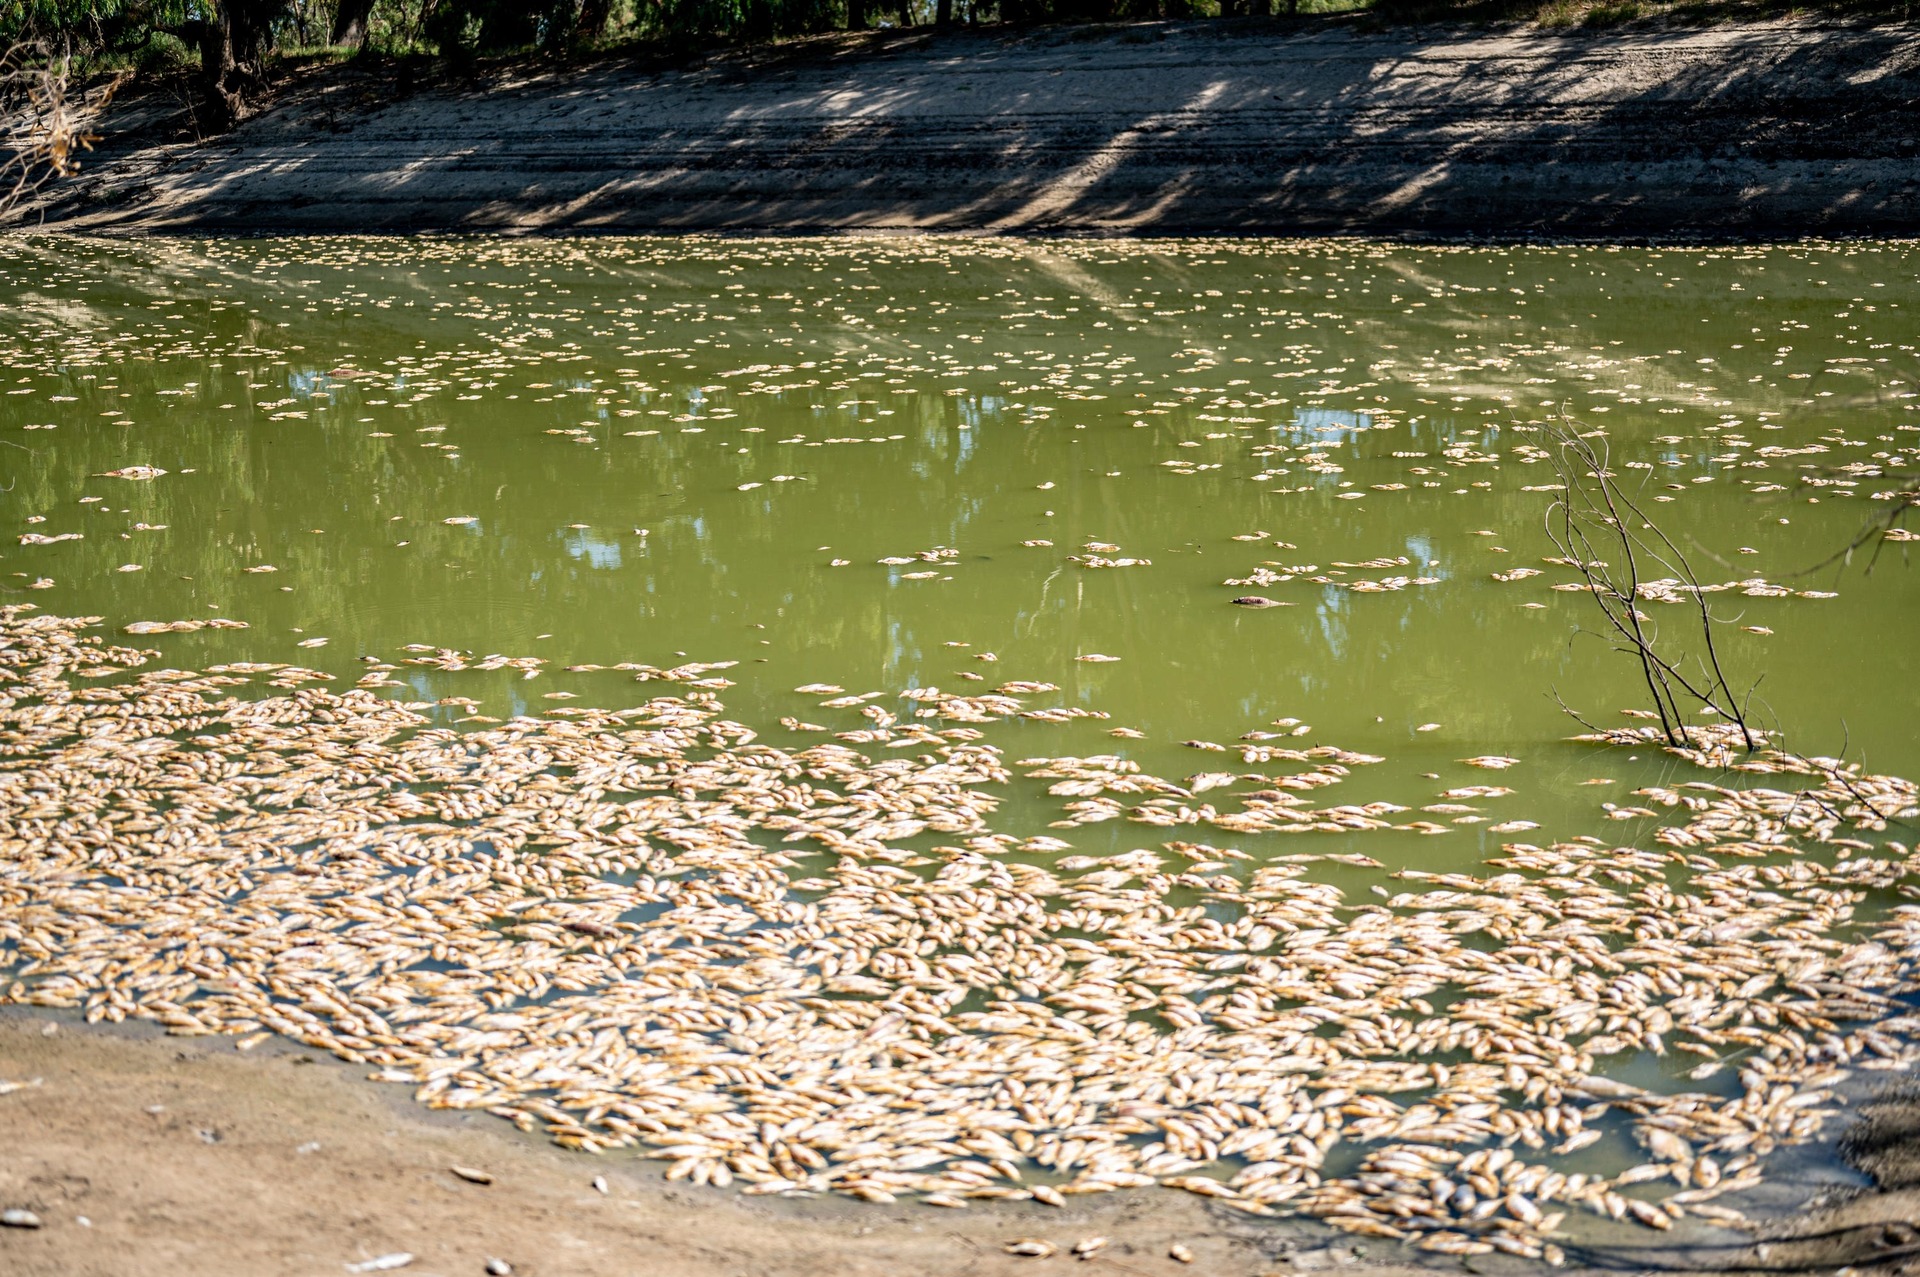 Dead fish float along the Darling River near Menindee in New South Wales.